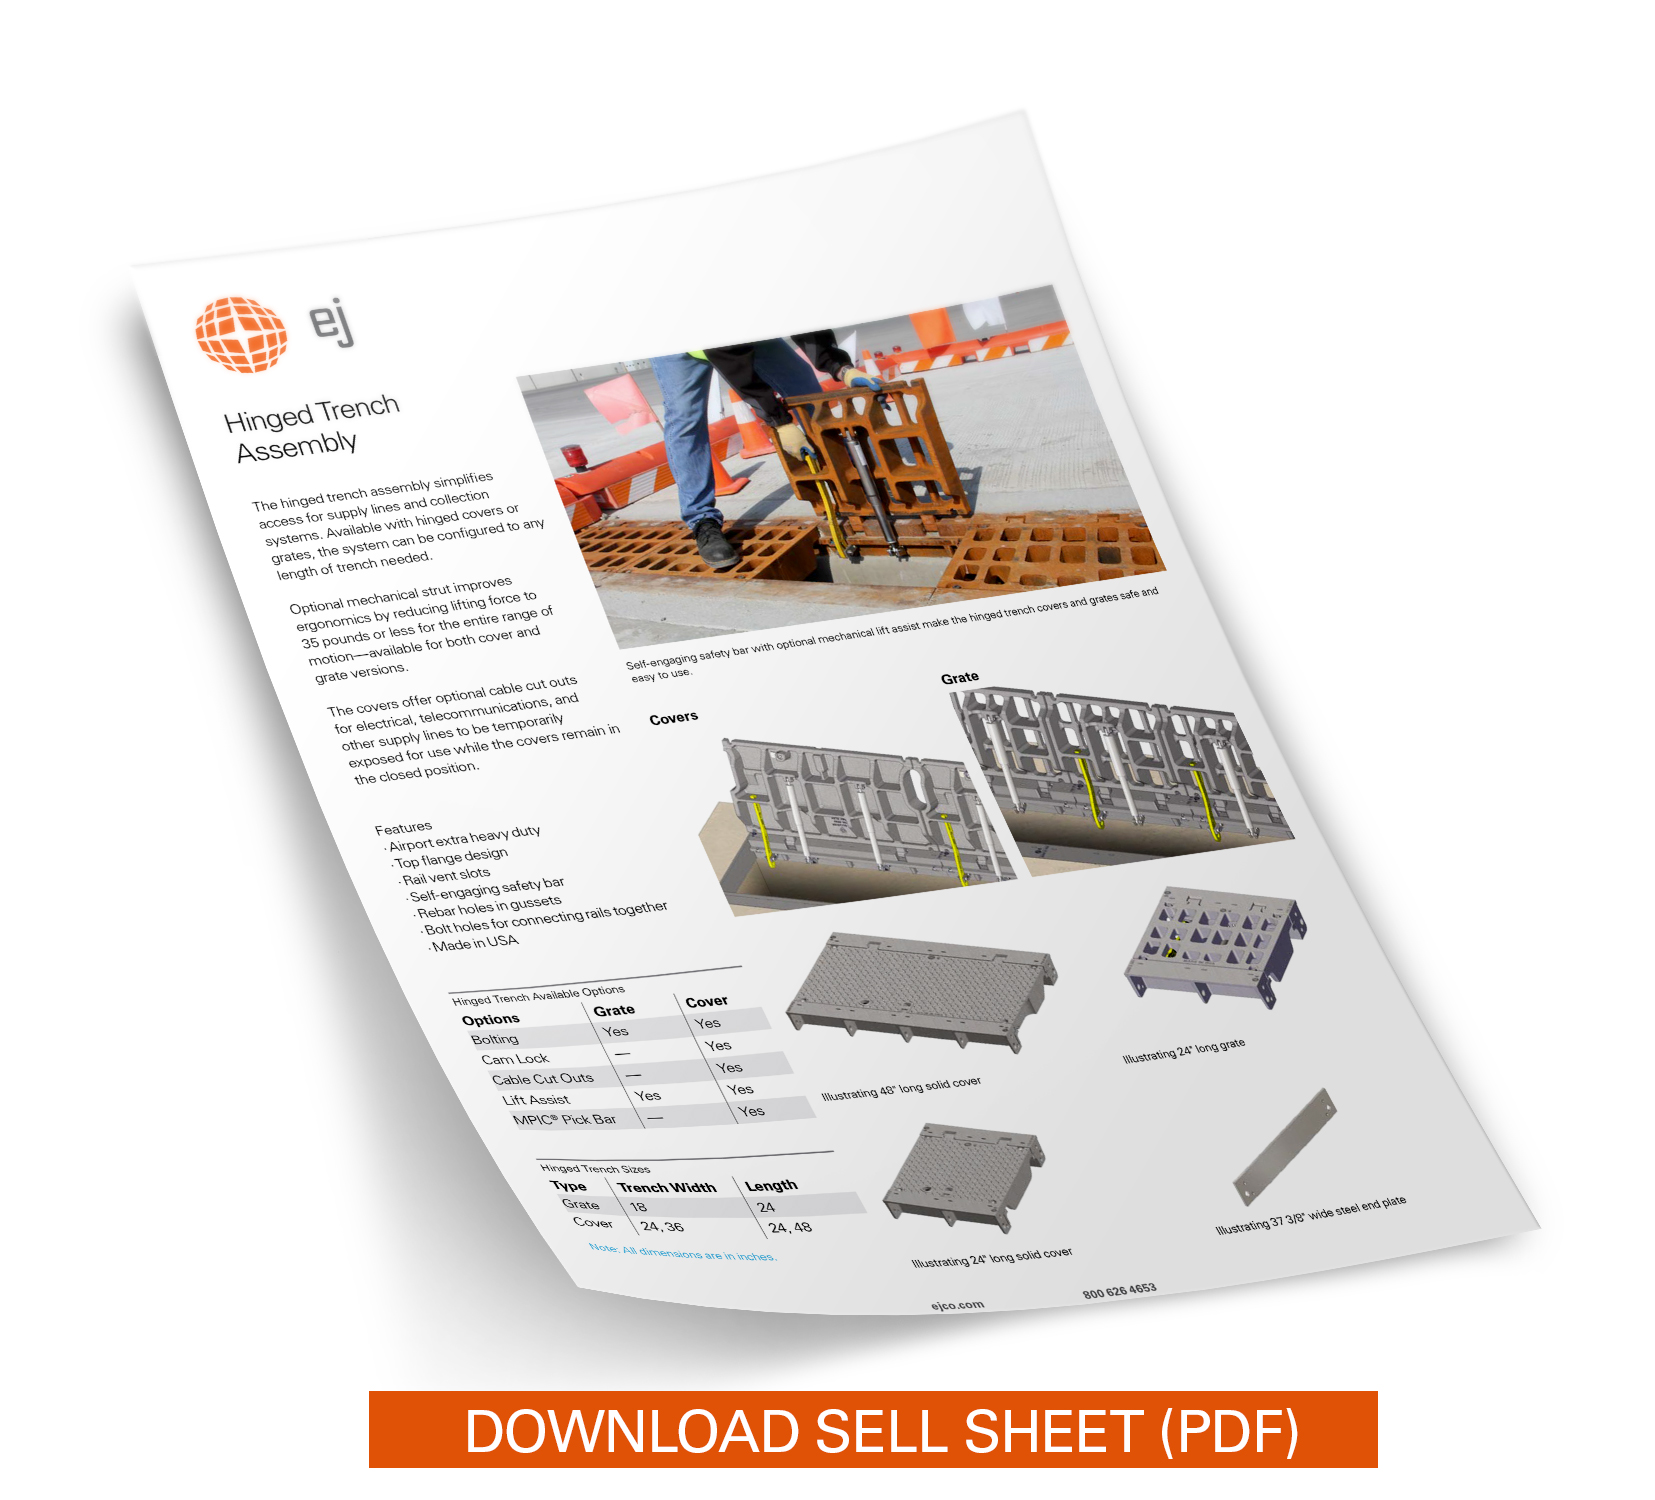 hinged_trench_sell_sheet_onepage_download